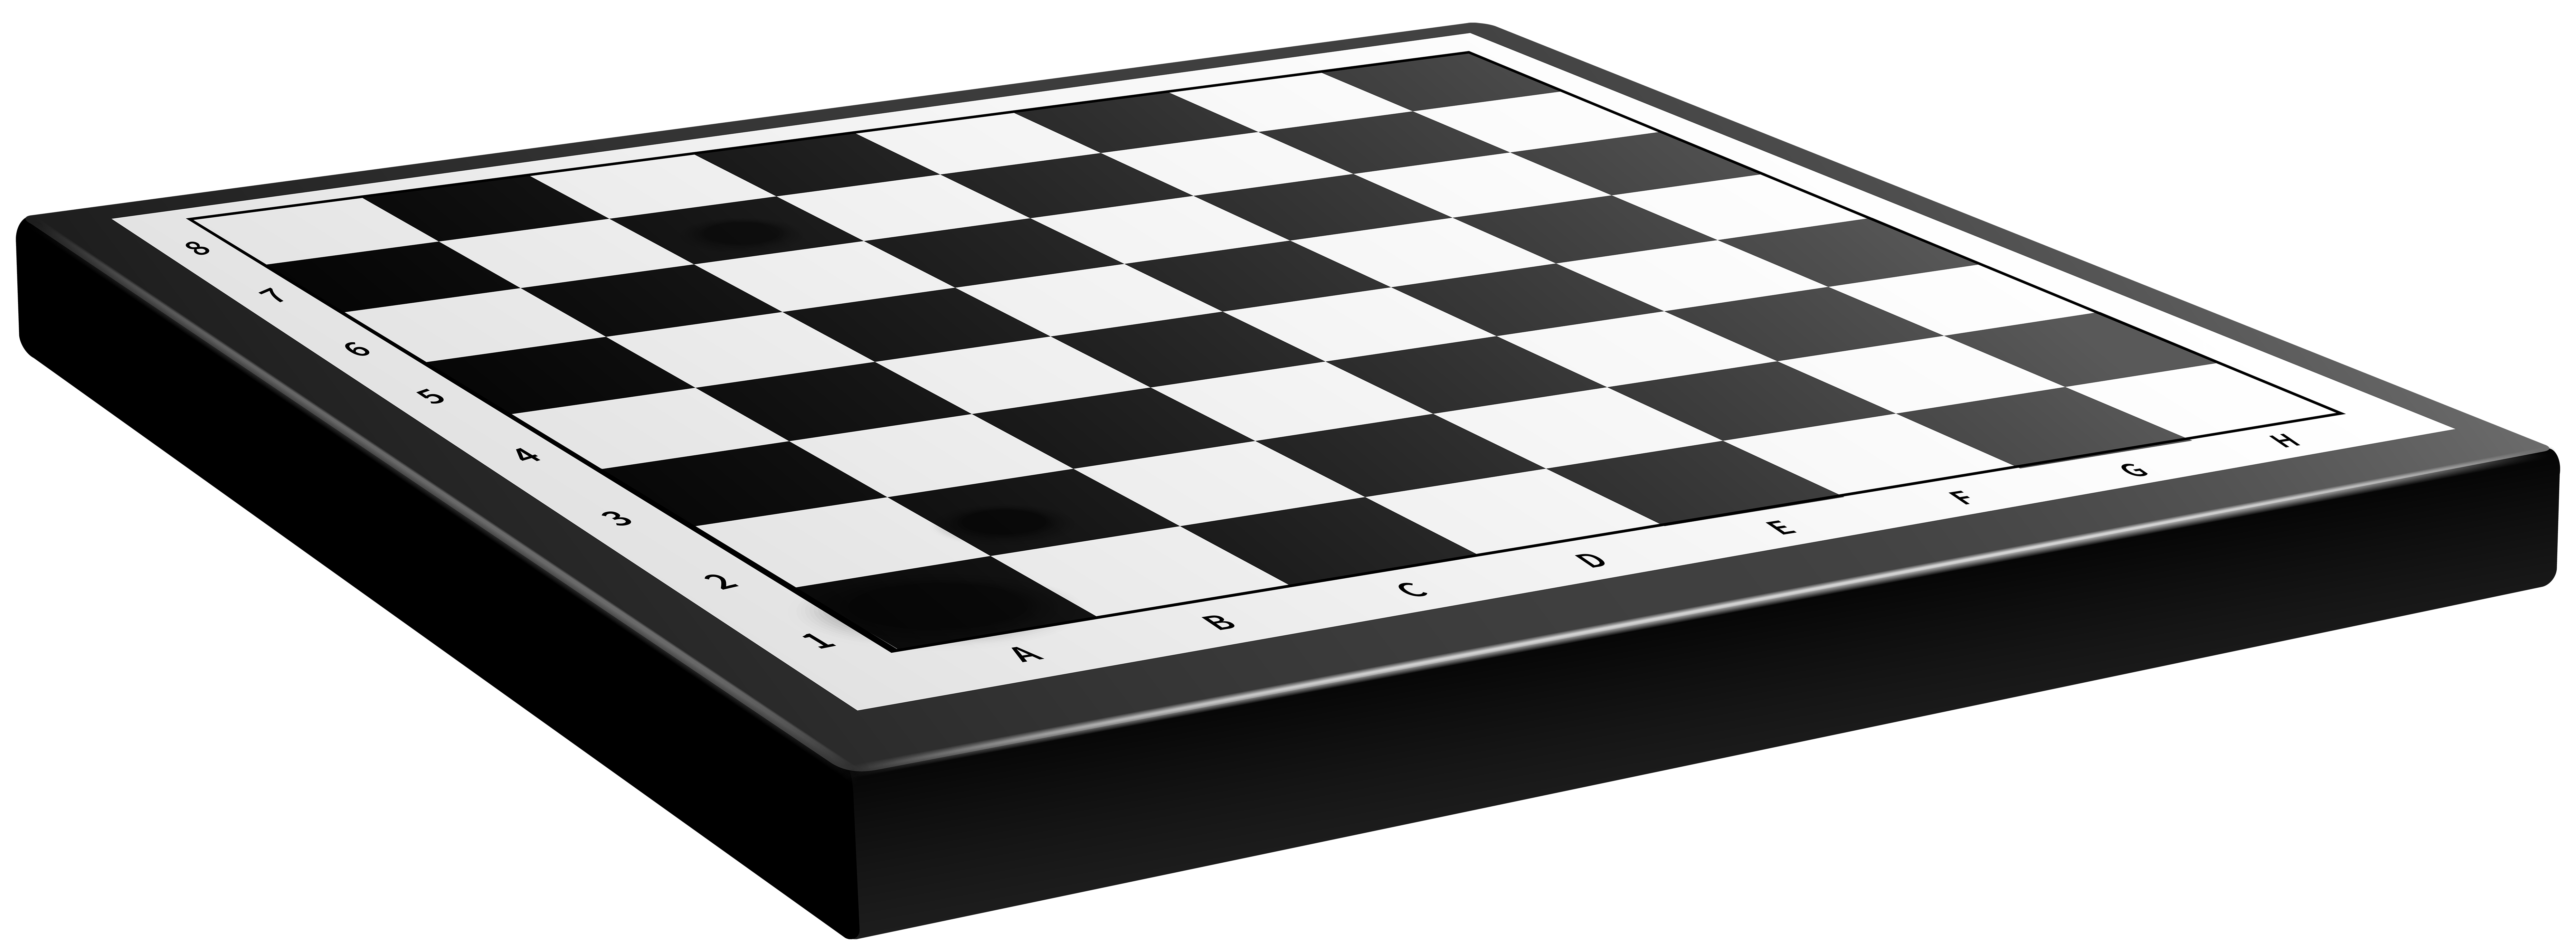 Chess board png.